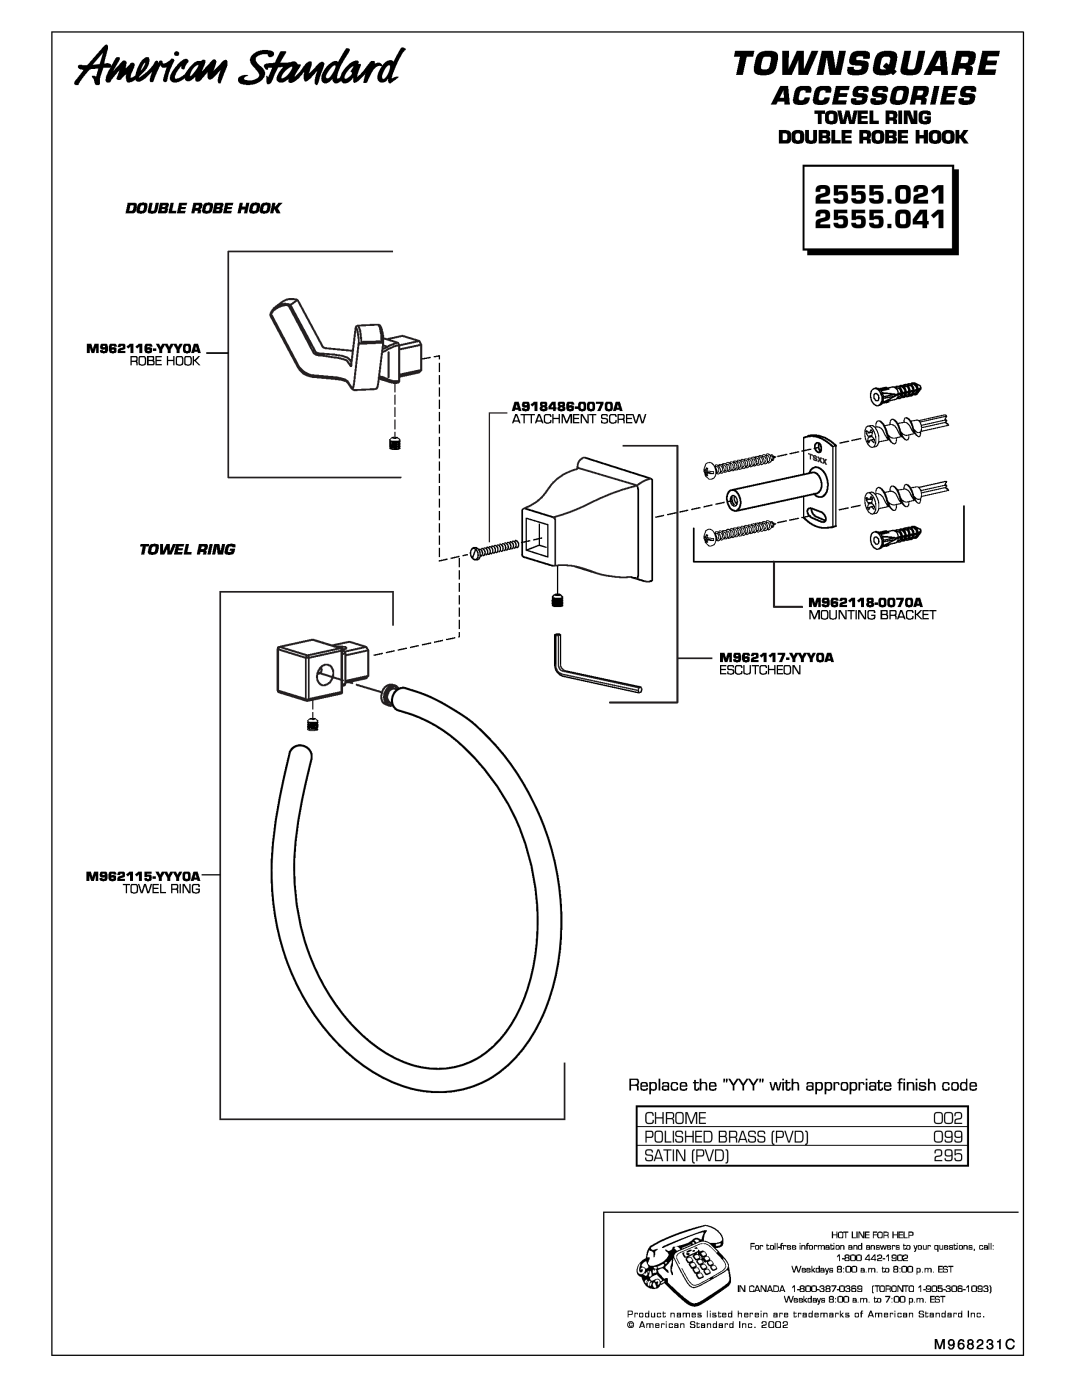 American Standard 2555.041 manual Townsquare, Accessories, 2555.021, Towel Ring Double Robe Hook, Chrome, Satin Pvd 